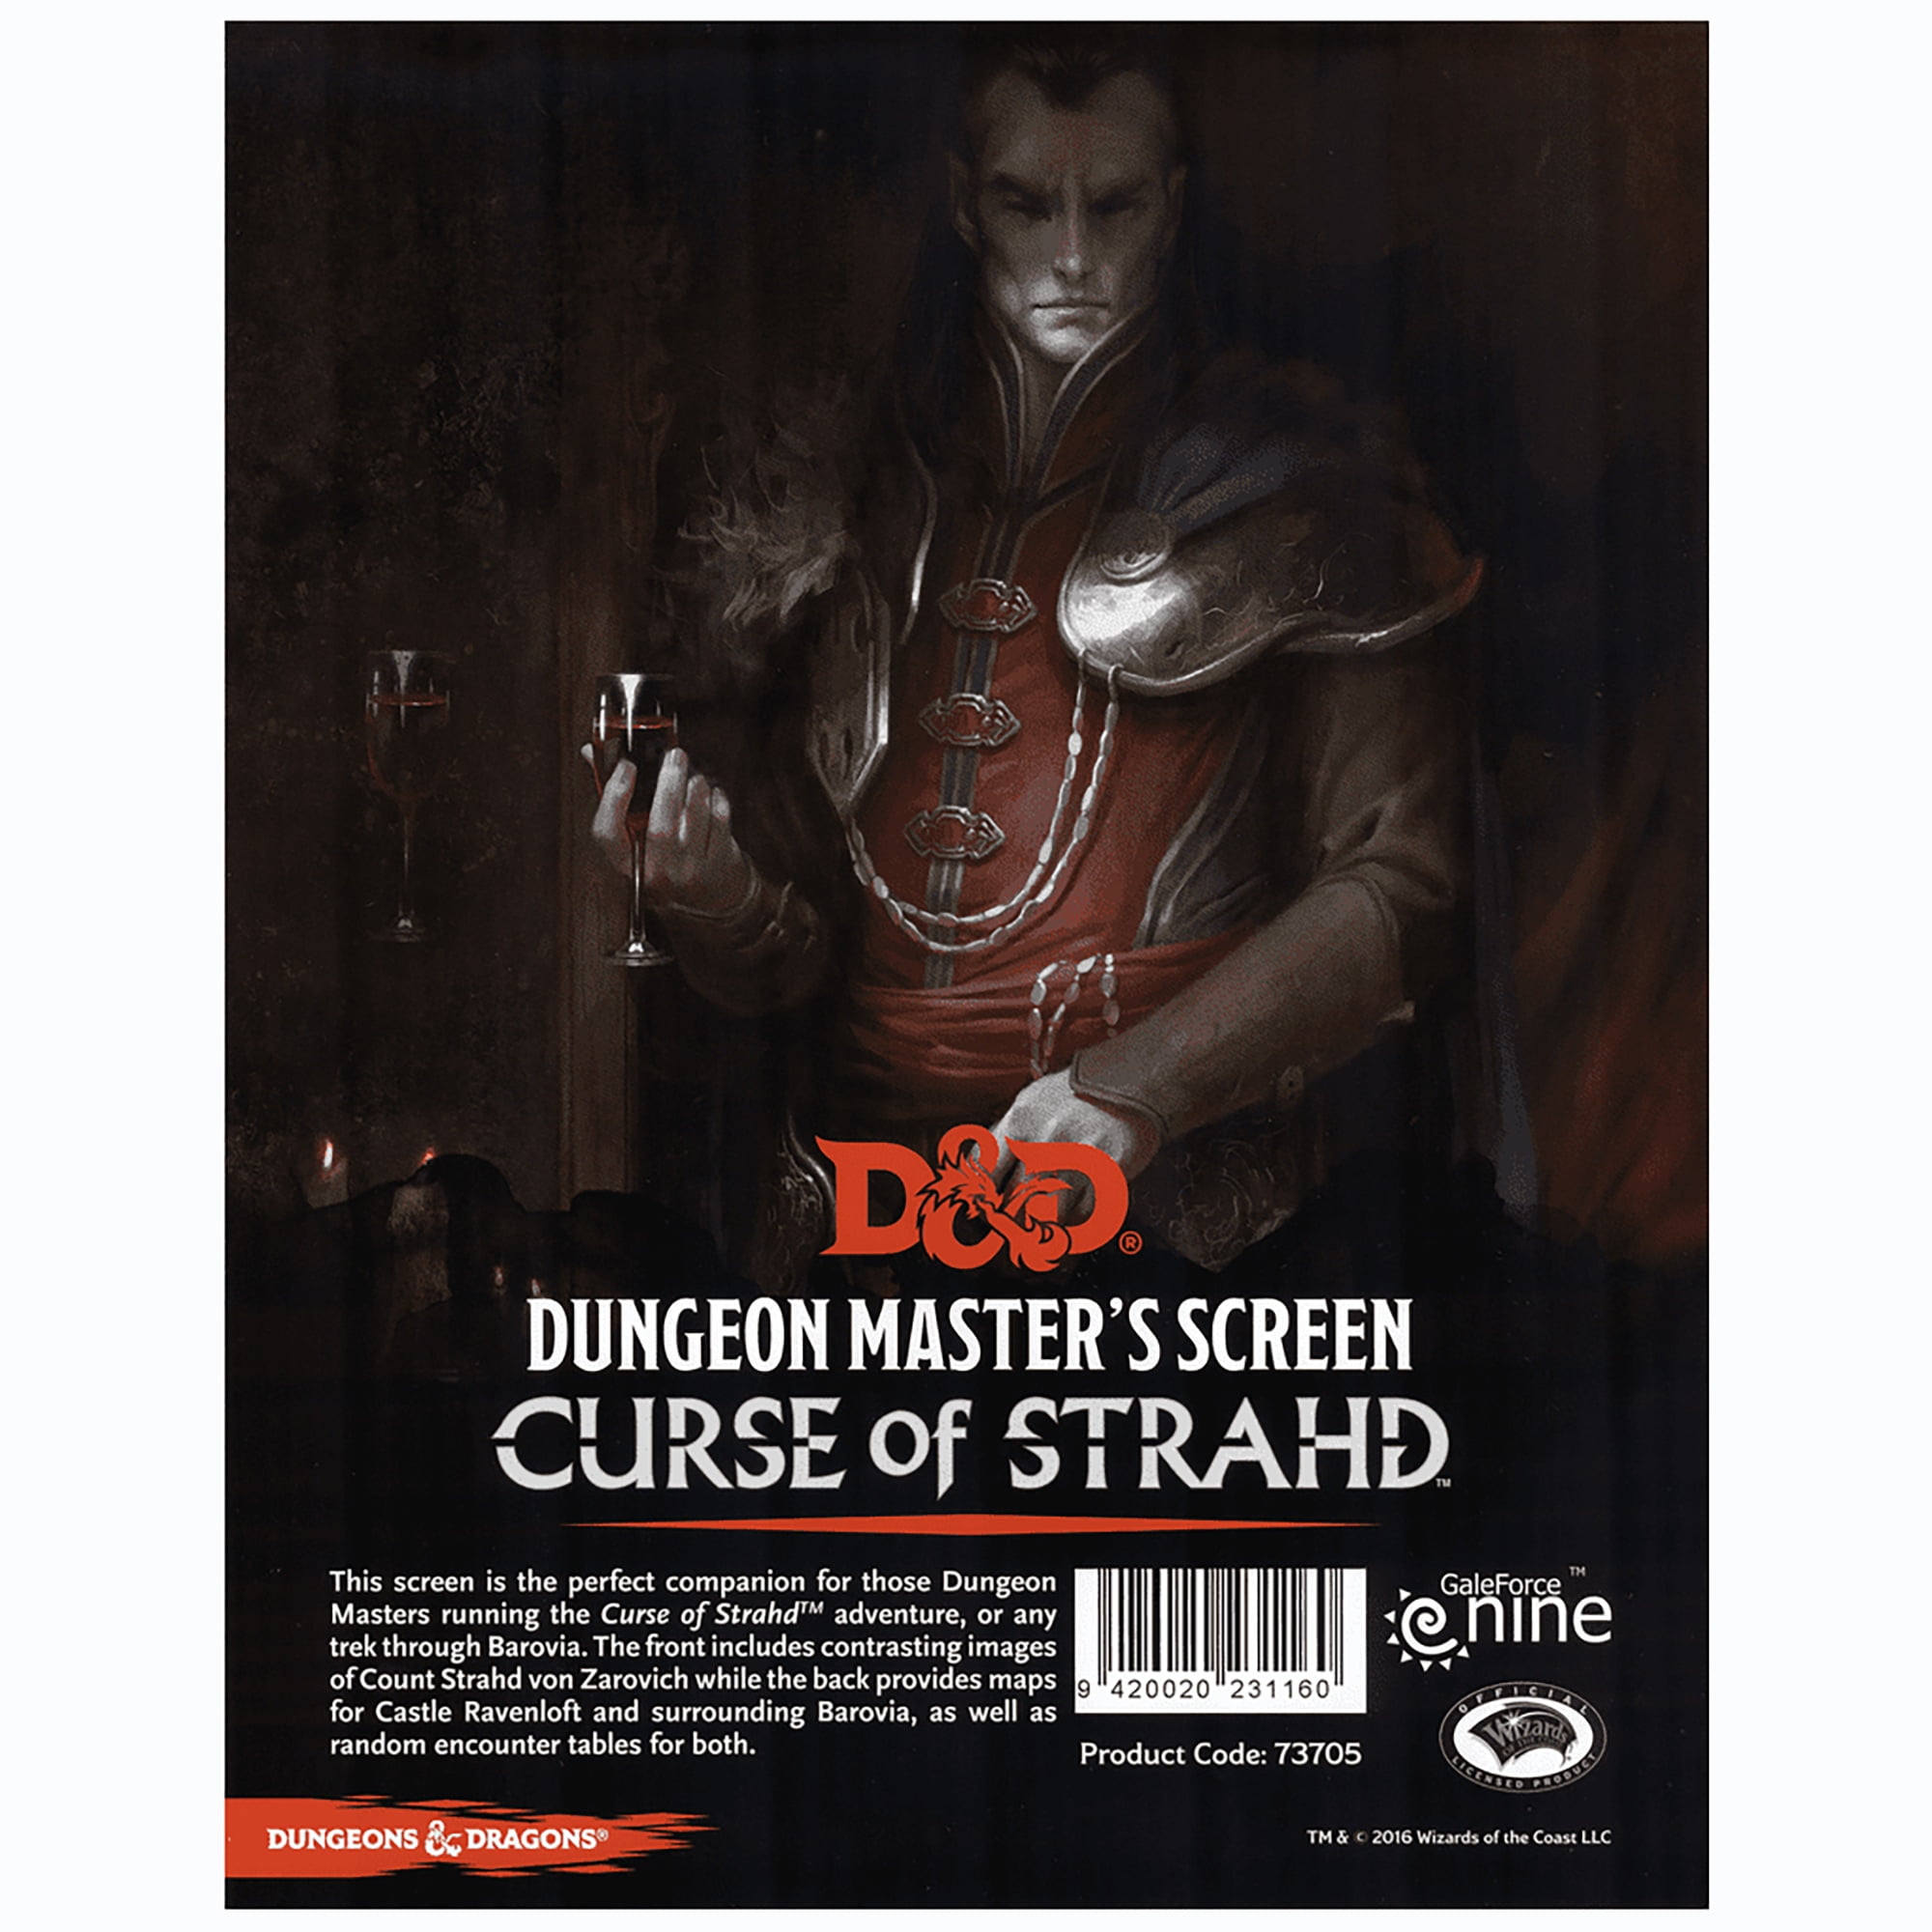 Curse of Strahd Companion: The Complete Edition - Dungeon